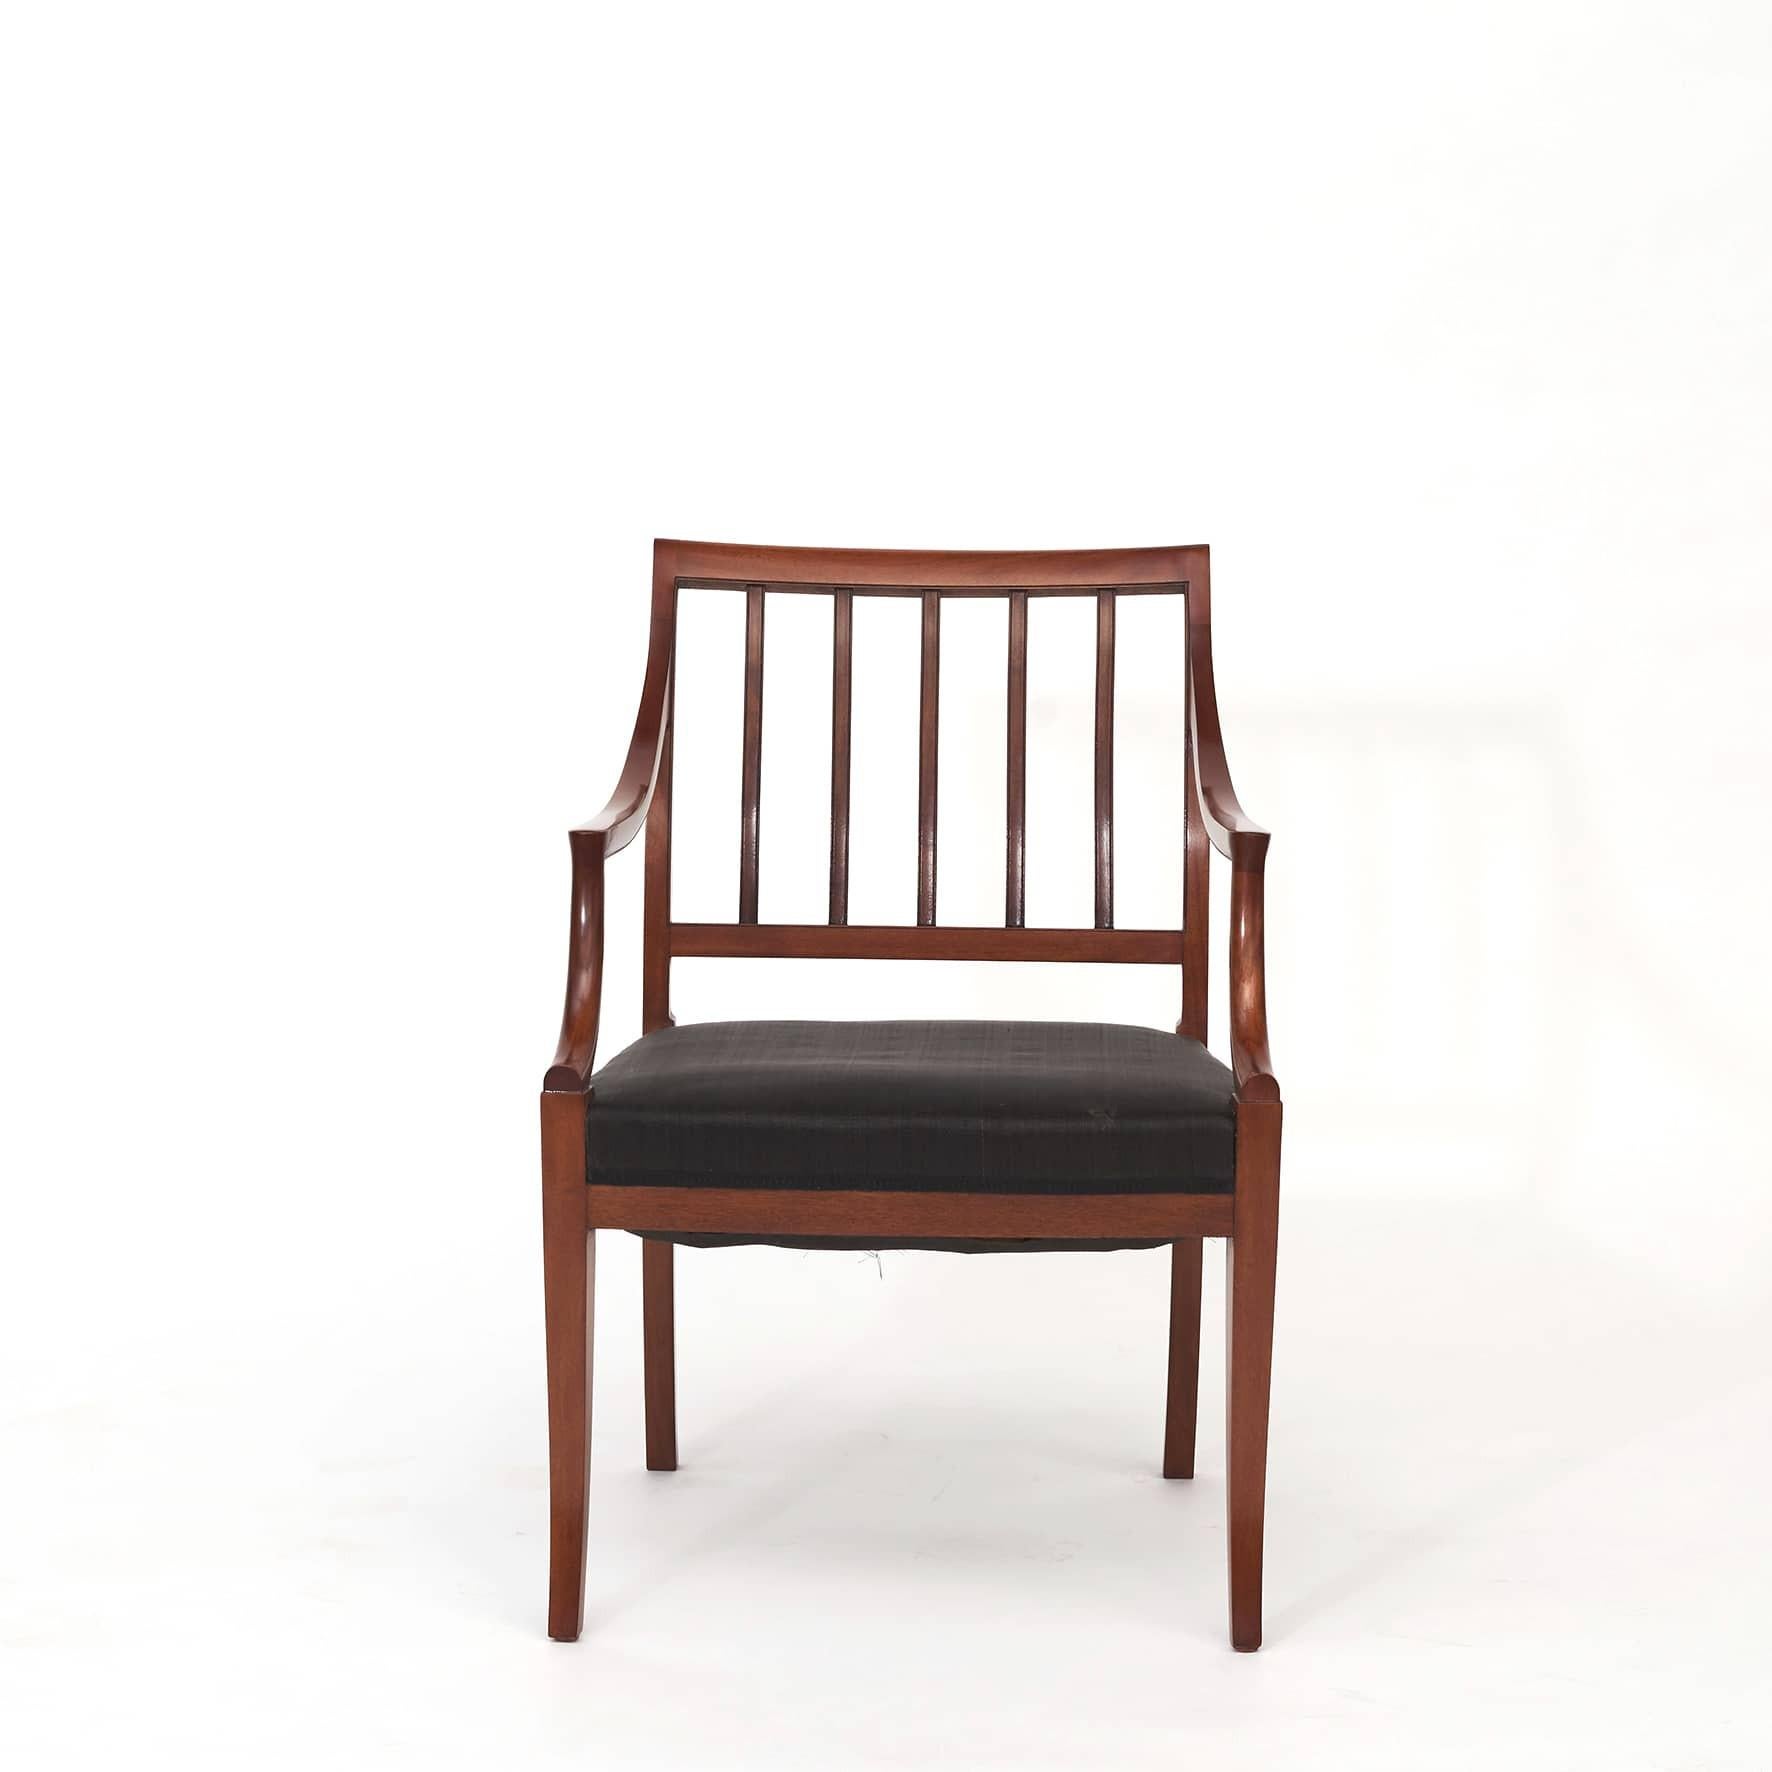 Frits Henningsen 1889-1965.
Desk arm chair in solid mahogany, seat with original horse hair upholstery.
Designed in 1930-1950.
Frits Henningsen was both a designer and a cabinet-maker. He cared deeply about quality, and was uncompromising in his